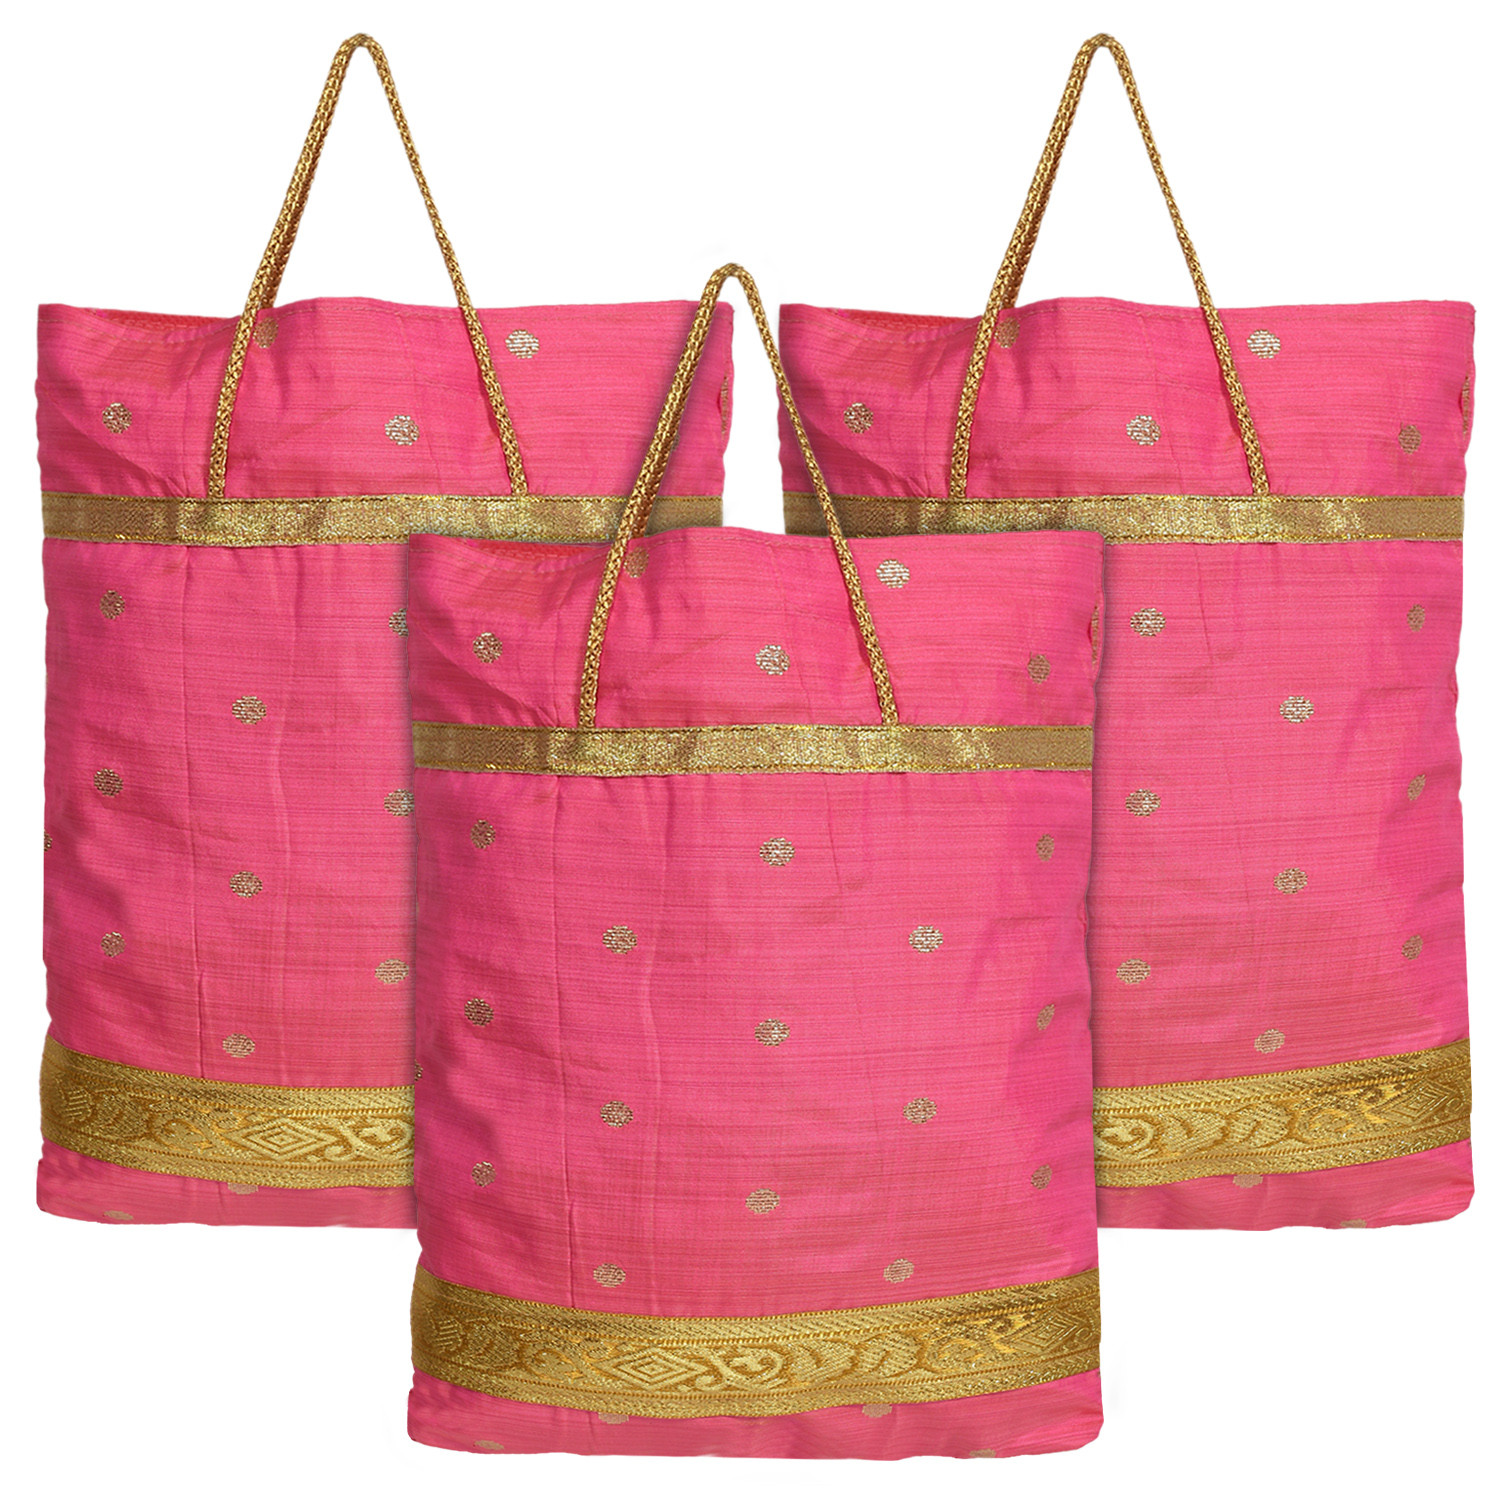 Kuber Industries Polyester Dot Design Foldable Potli|Shopping|Gifting, Hand Bag With Handle (Pink)